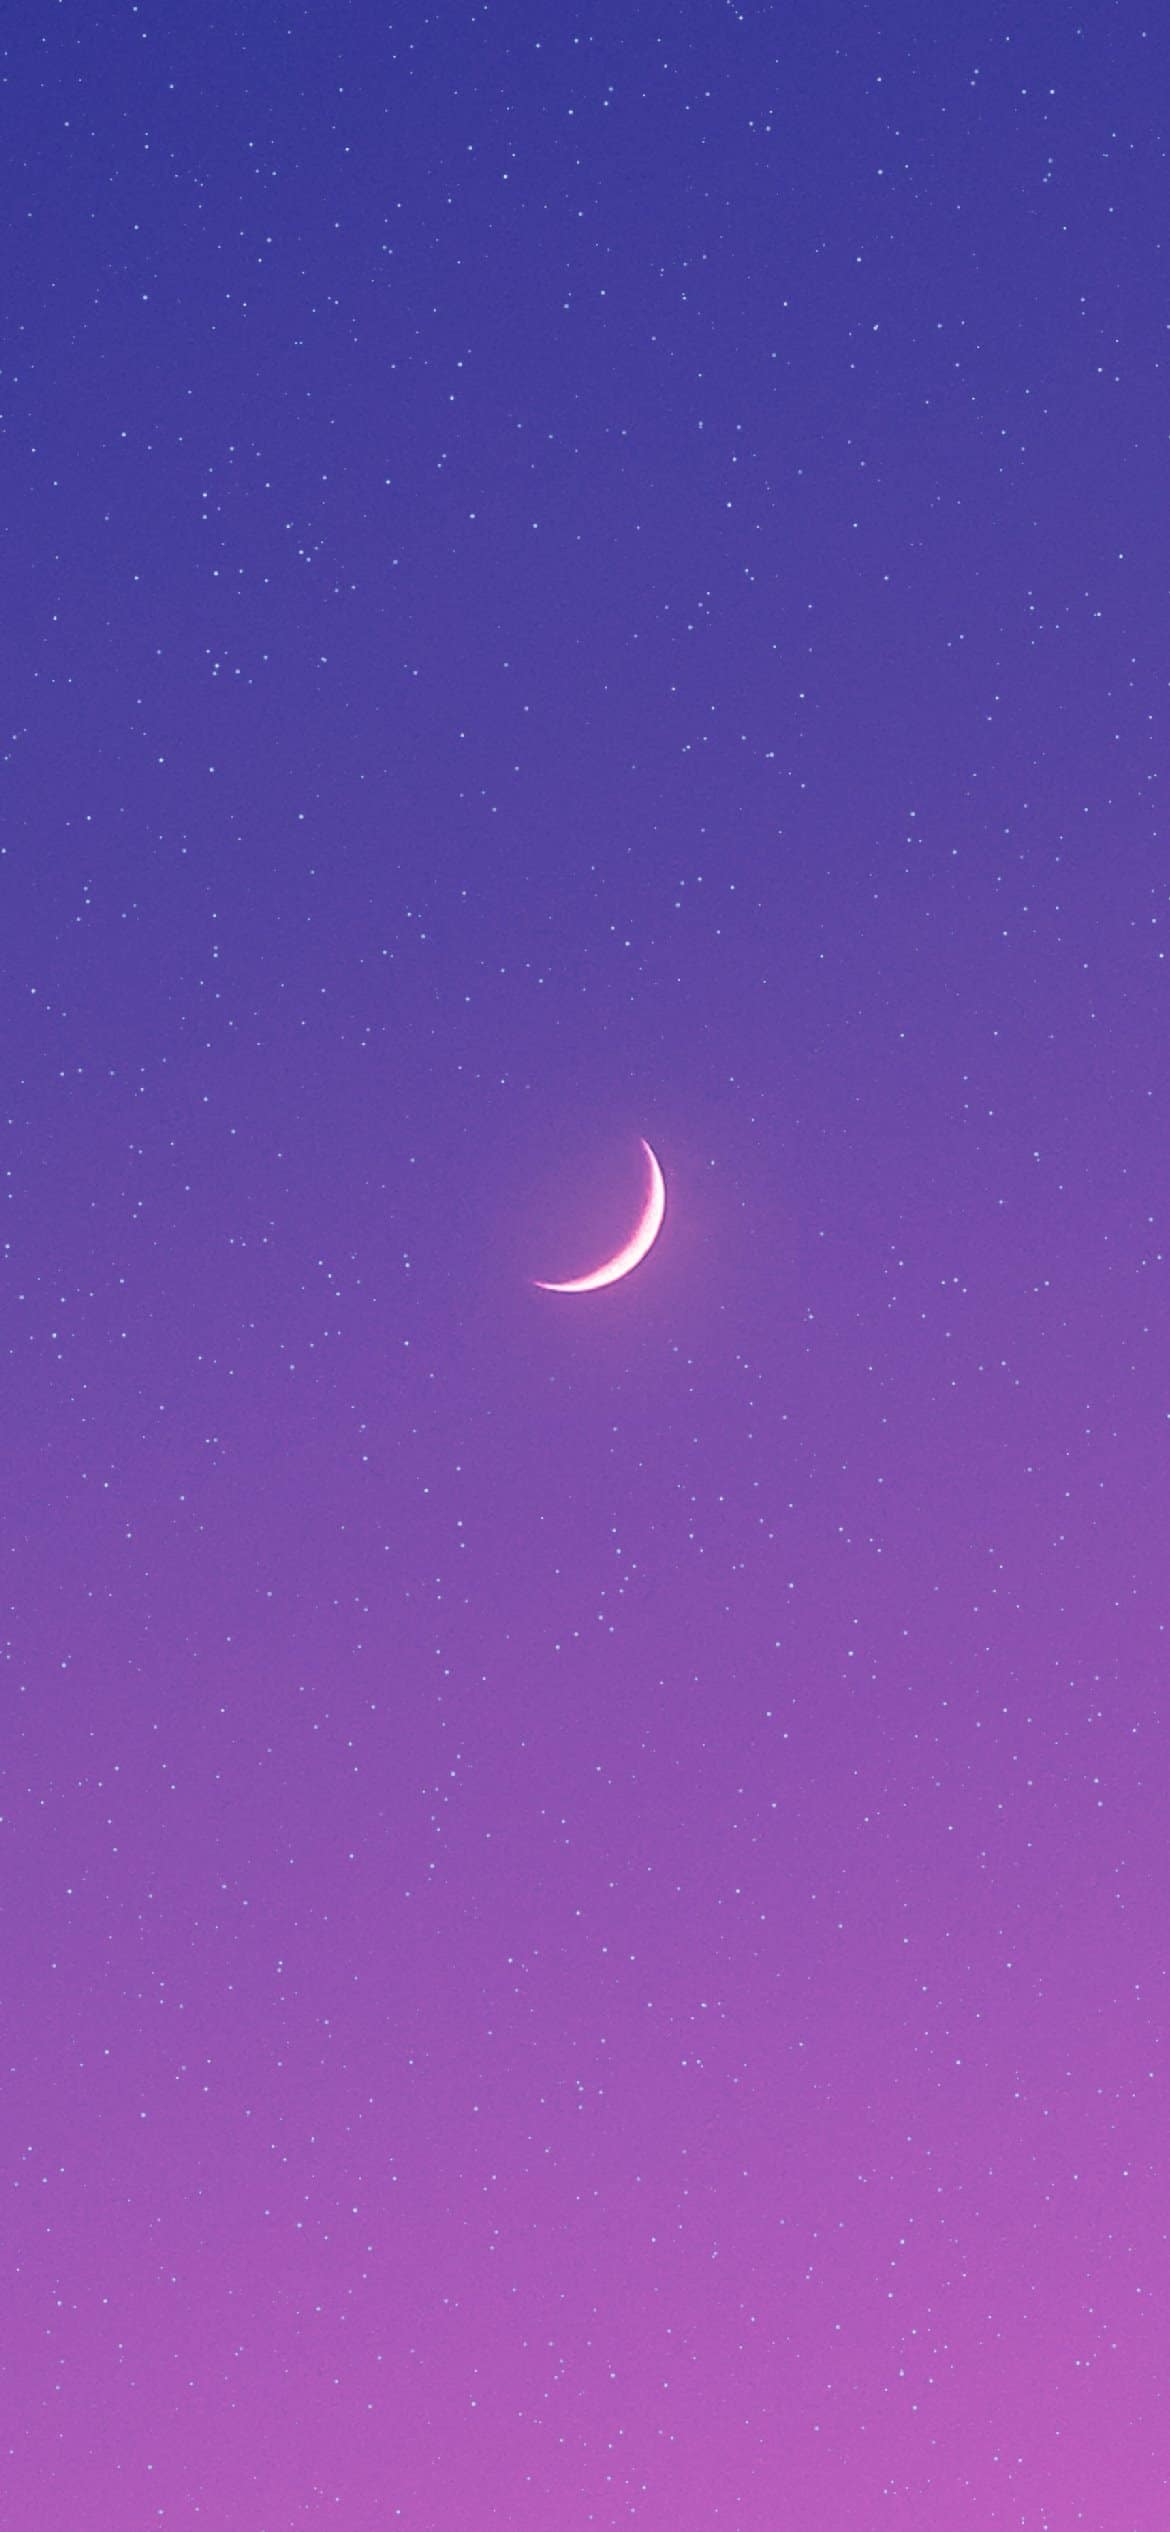 Purple Wallpaper Pictures  Download Free Images on Unsplash